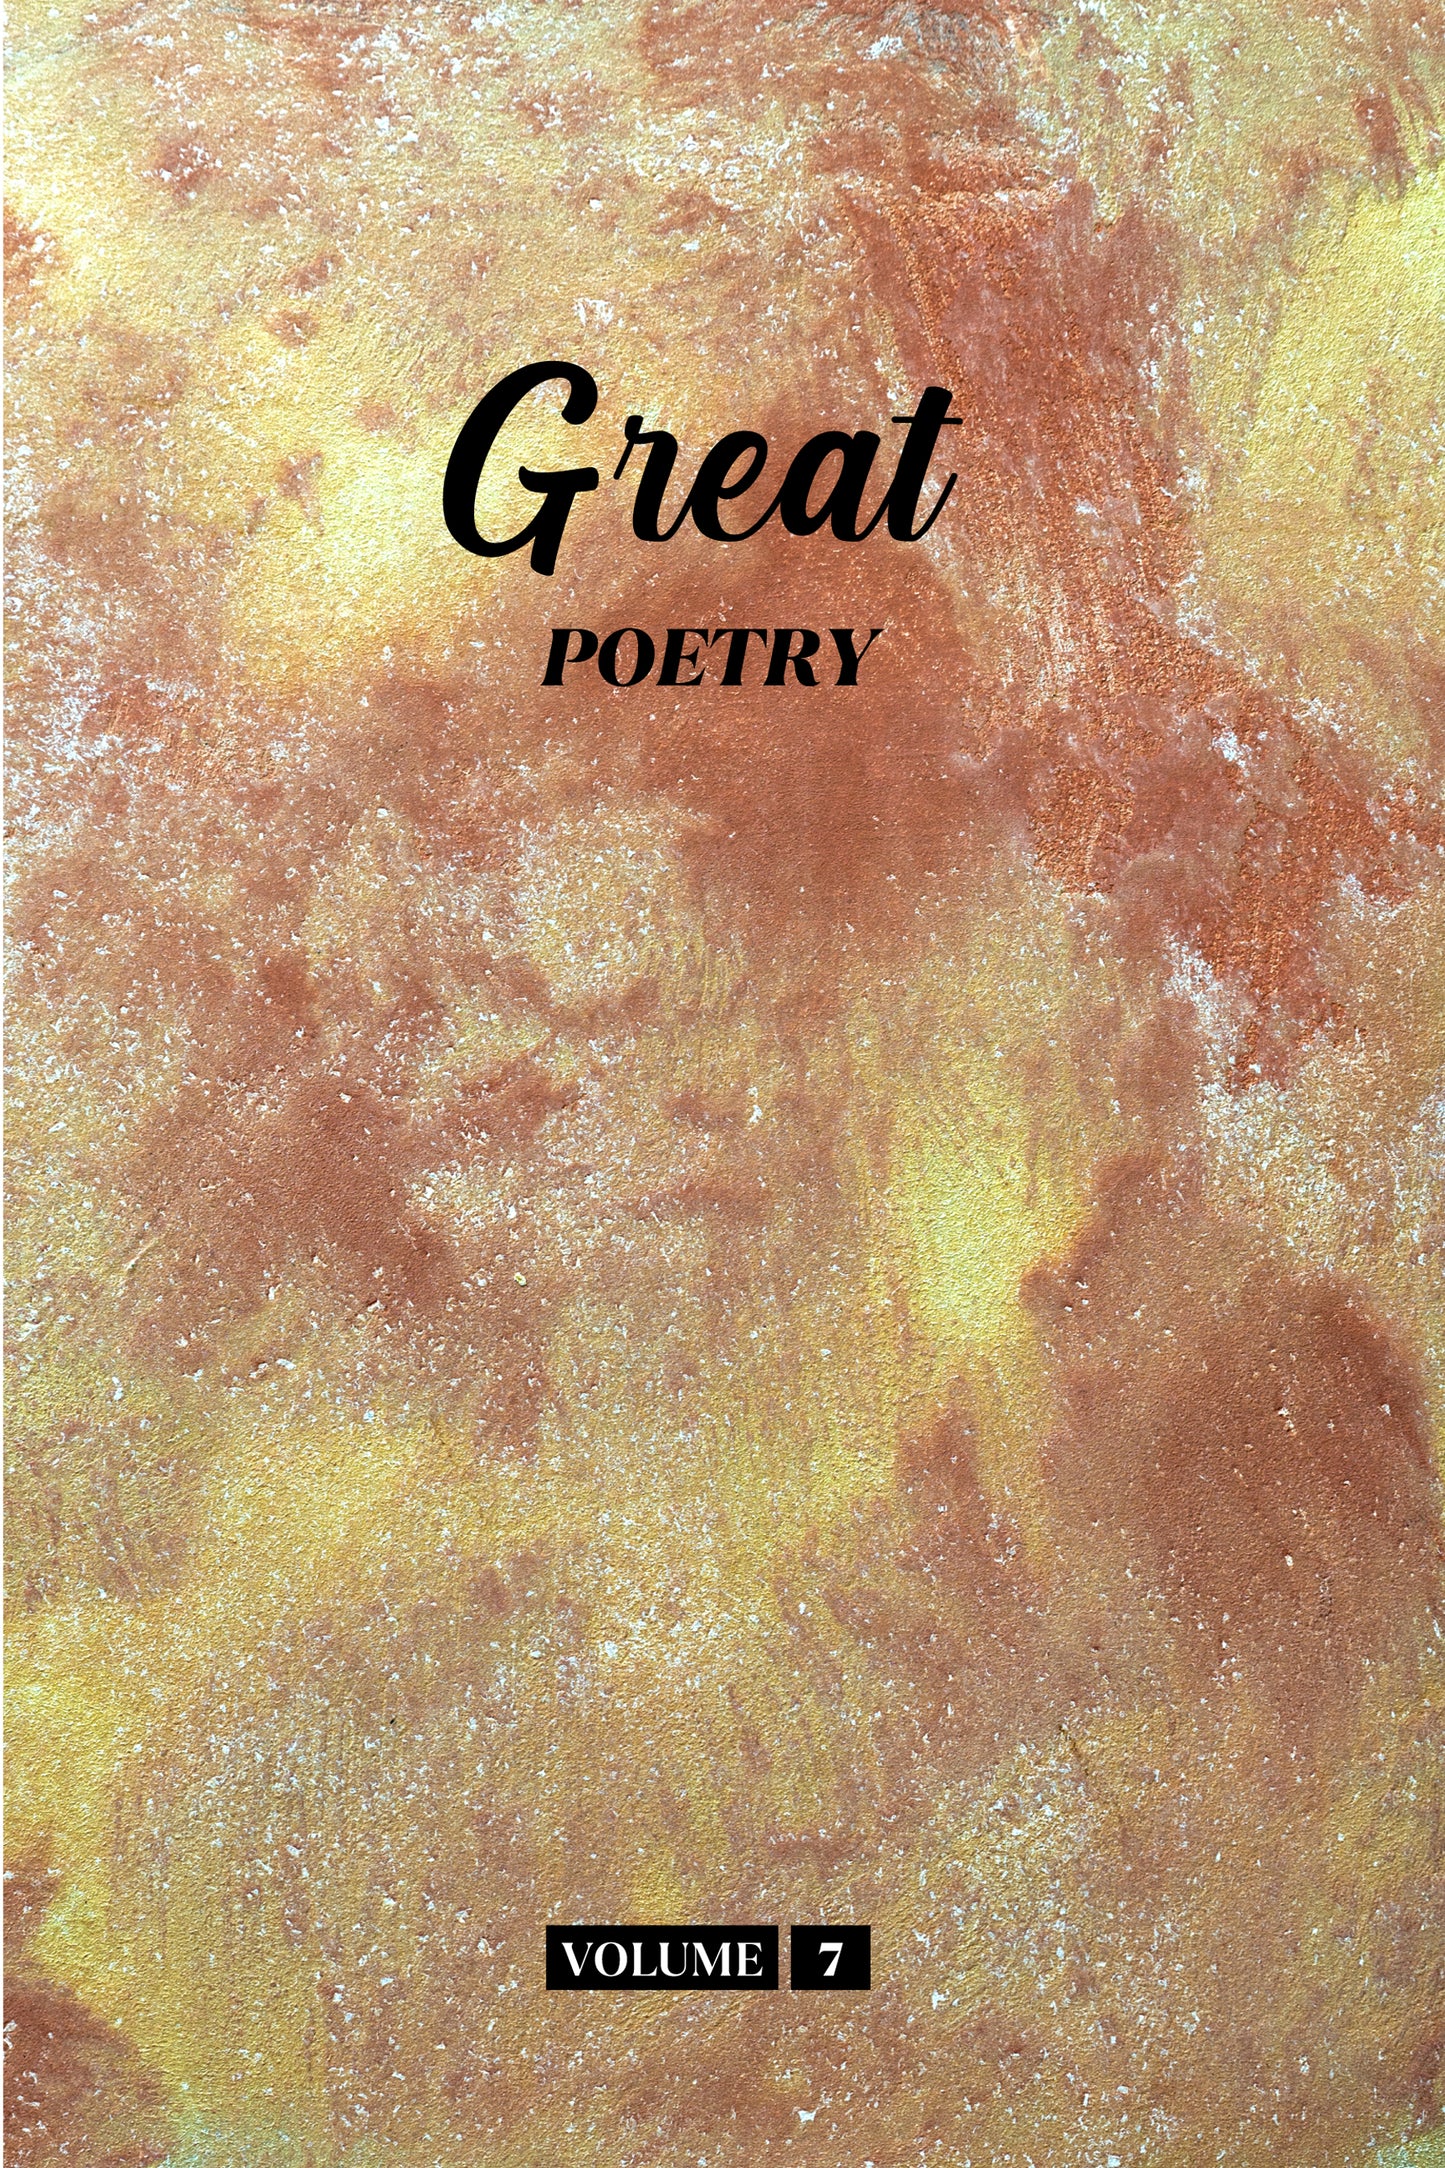 Great Poetry (Volume 7) - Physical Book